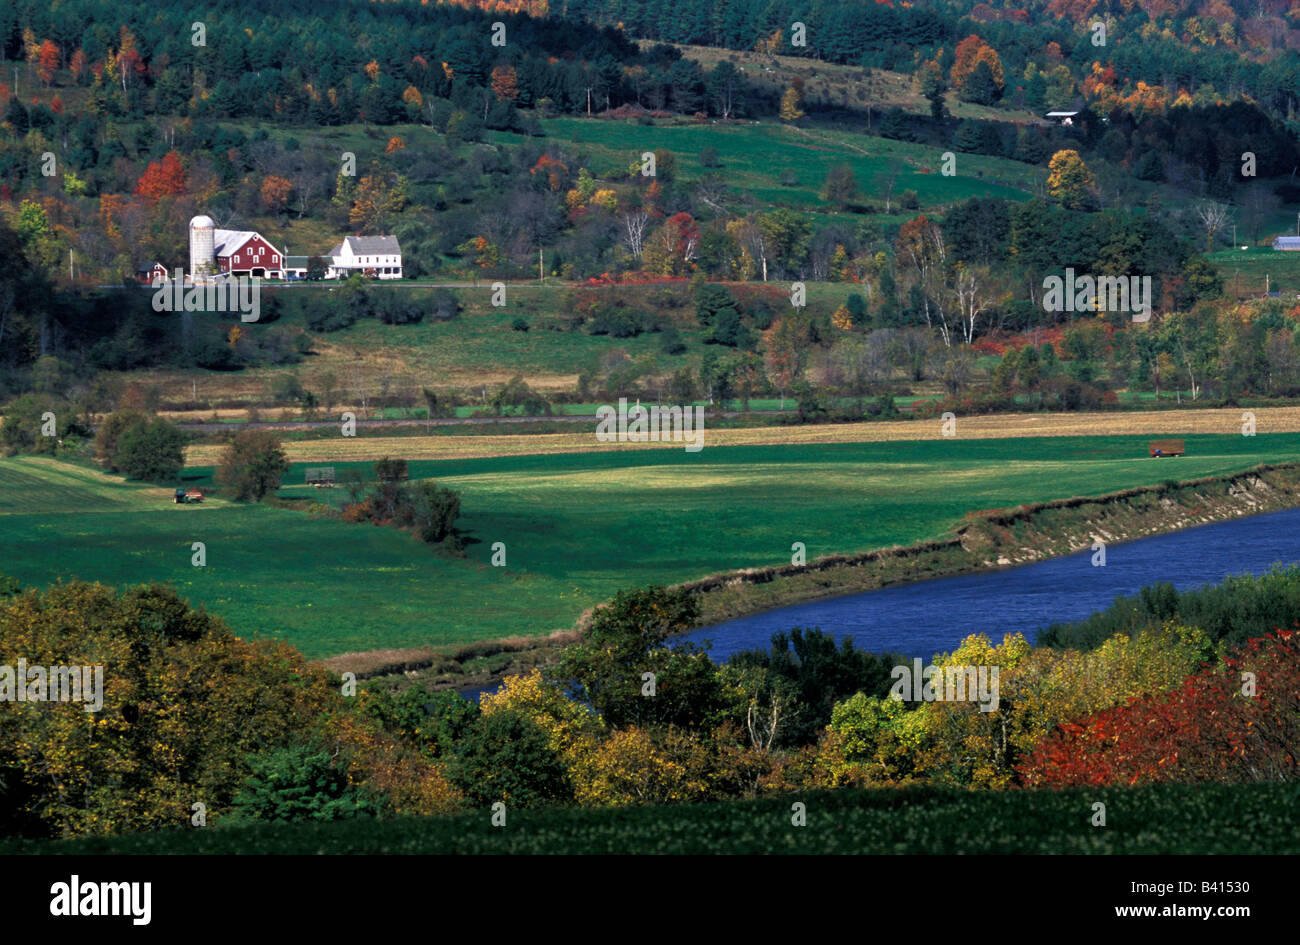 North America, United States, Vermont. Red barn on rolling hills. Stock Photo